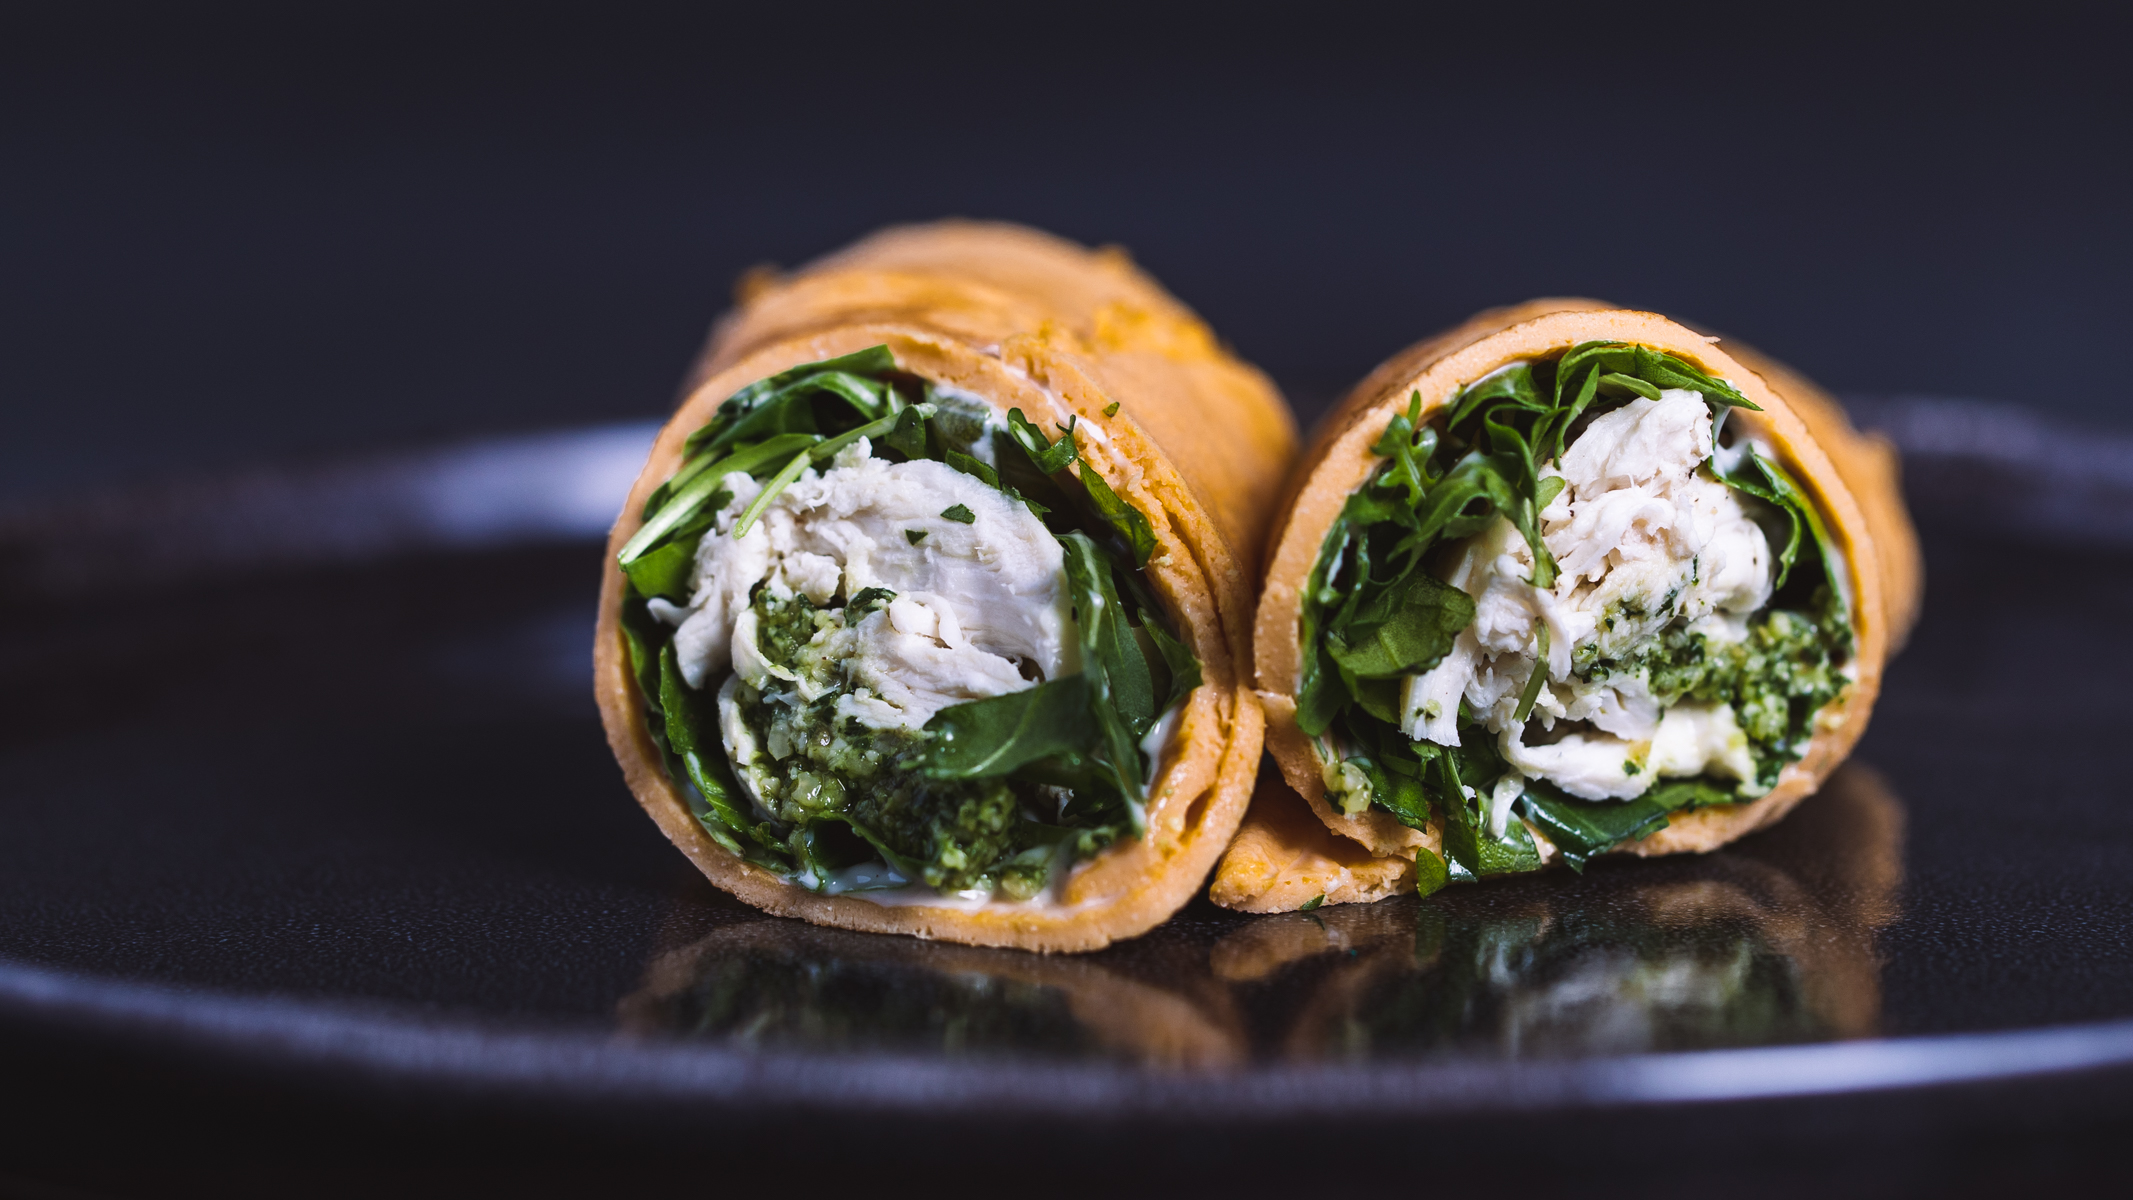 Side view of cut egg wraps with chicken, pesto and arugula on a black plate and background.